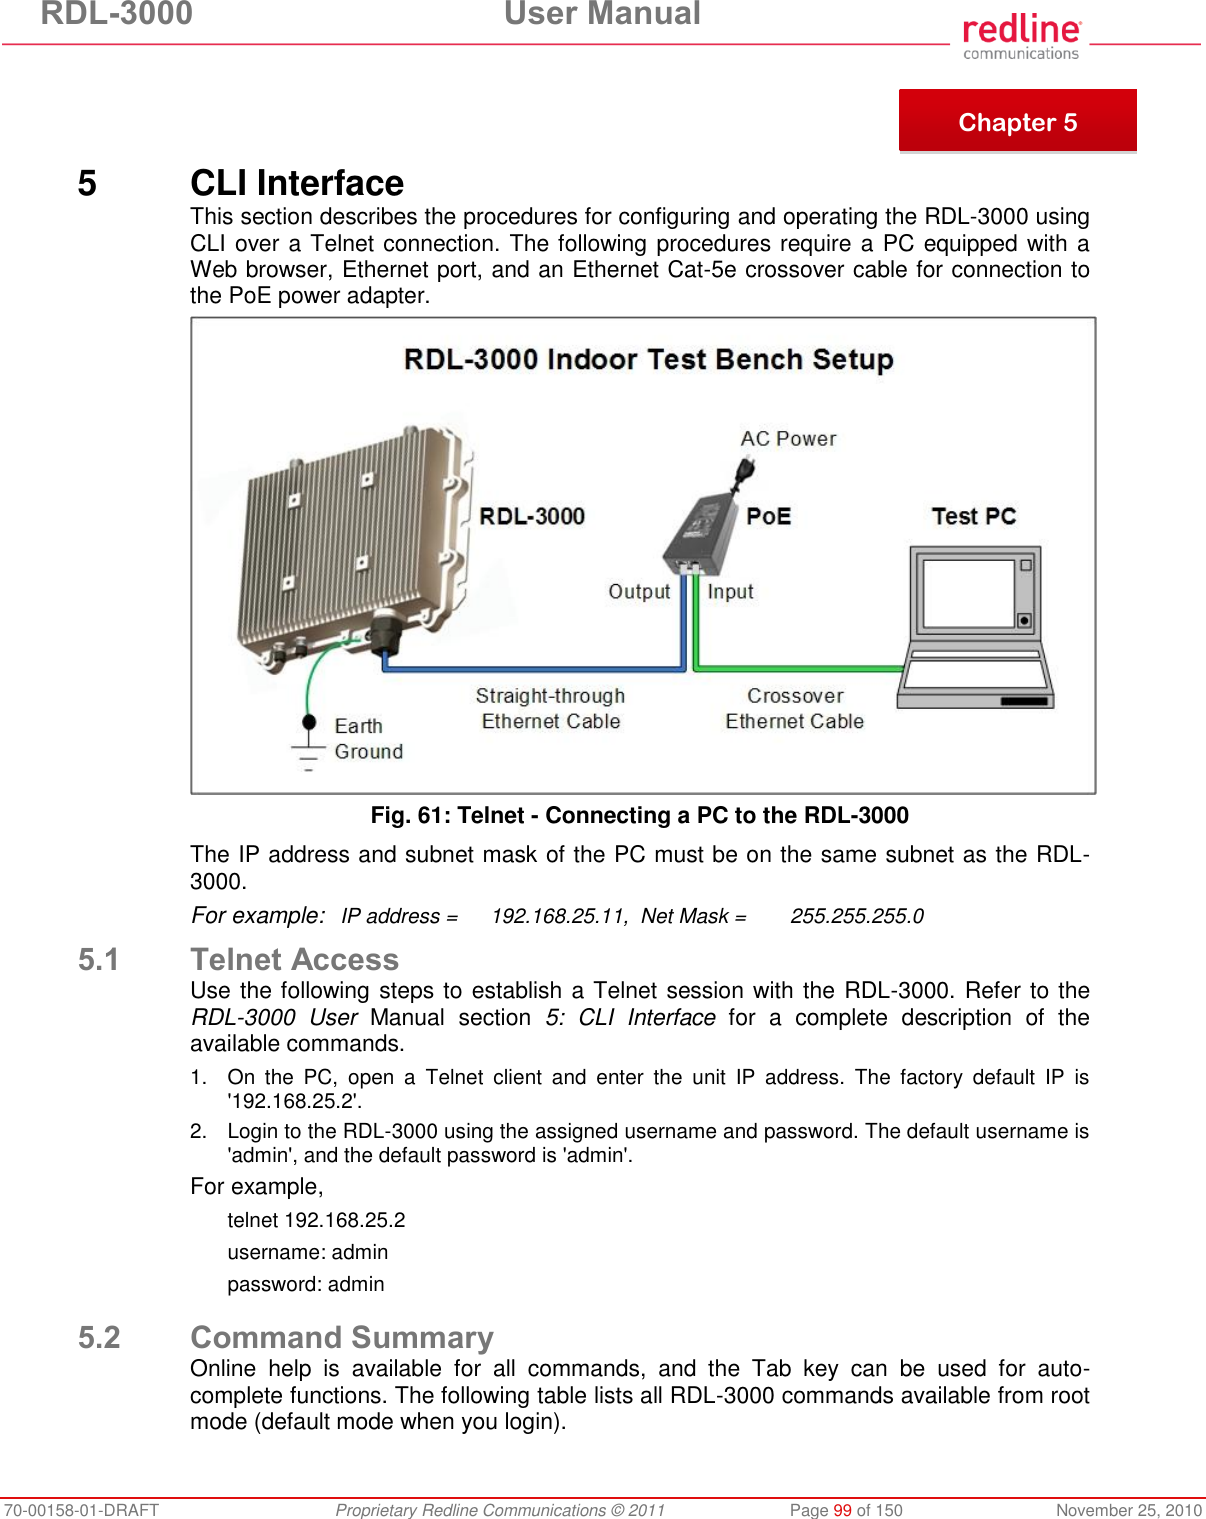 RDL-3000  User Manual 70-00158-01-DRAFT  Proprietary Redline Communications © 2011  Page 99 of 150  November 25, 2010      5  CLI Interface This section describes the procedures for configuring and operating the RDL-3000 using CLI over a Telnet connection. The following procedures require a PC equipped with a Web browser, Ethernet port, and an Ethernet Cat-5e crossover cable for connection to the PoE power adapter.  Fig. 61: Telnet - Connecting a PC to the RDL-3000 The IP address and subnet mask of the PC must be on the same subnet as the RDL-3000.  For example:   IP address =  192.168.25.11,  Net Mask =  255.255.255.0 5.1 Telnet Access Use the following steps to establish a Telnet session with the RDL-3000. Refer to the RDL-3000  User  Manual  section  5:  CLI  Interface  for  a  complete  description  of  the available commands.  1.  On  the  PC,  open  a  Telnet  client  and  enter  the  unit  IP  address.  The  factory  default  IP  is &apos;192.168.25.2&apos;. 2.  Login to the RDL-3000 using the assigned username and password. The default username is &apos;admin&apos;, and the default password is &apos;admin&apos;. For example,  telnet 192.168.25.2 username: admin password: admin  5.2 Command Summary Online  help  is  available  for  all  commands,  and  the  Tab  key  can  be  used  for  auto-complete functions. The following table lists all RDL-3000 commands available from root mode (default mode when you login).  Chapter 5 